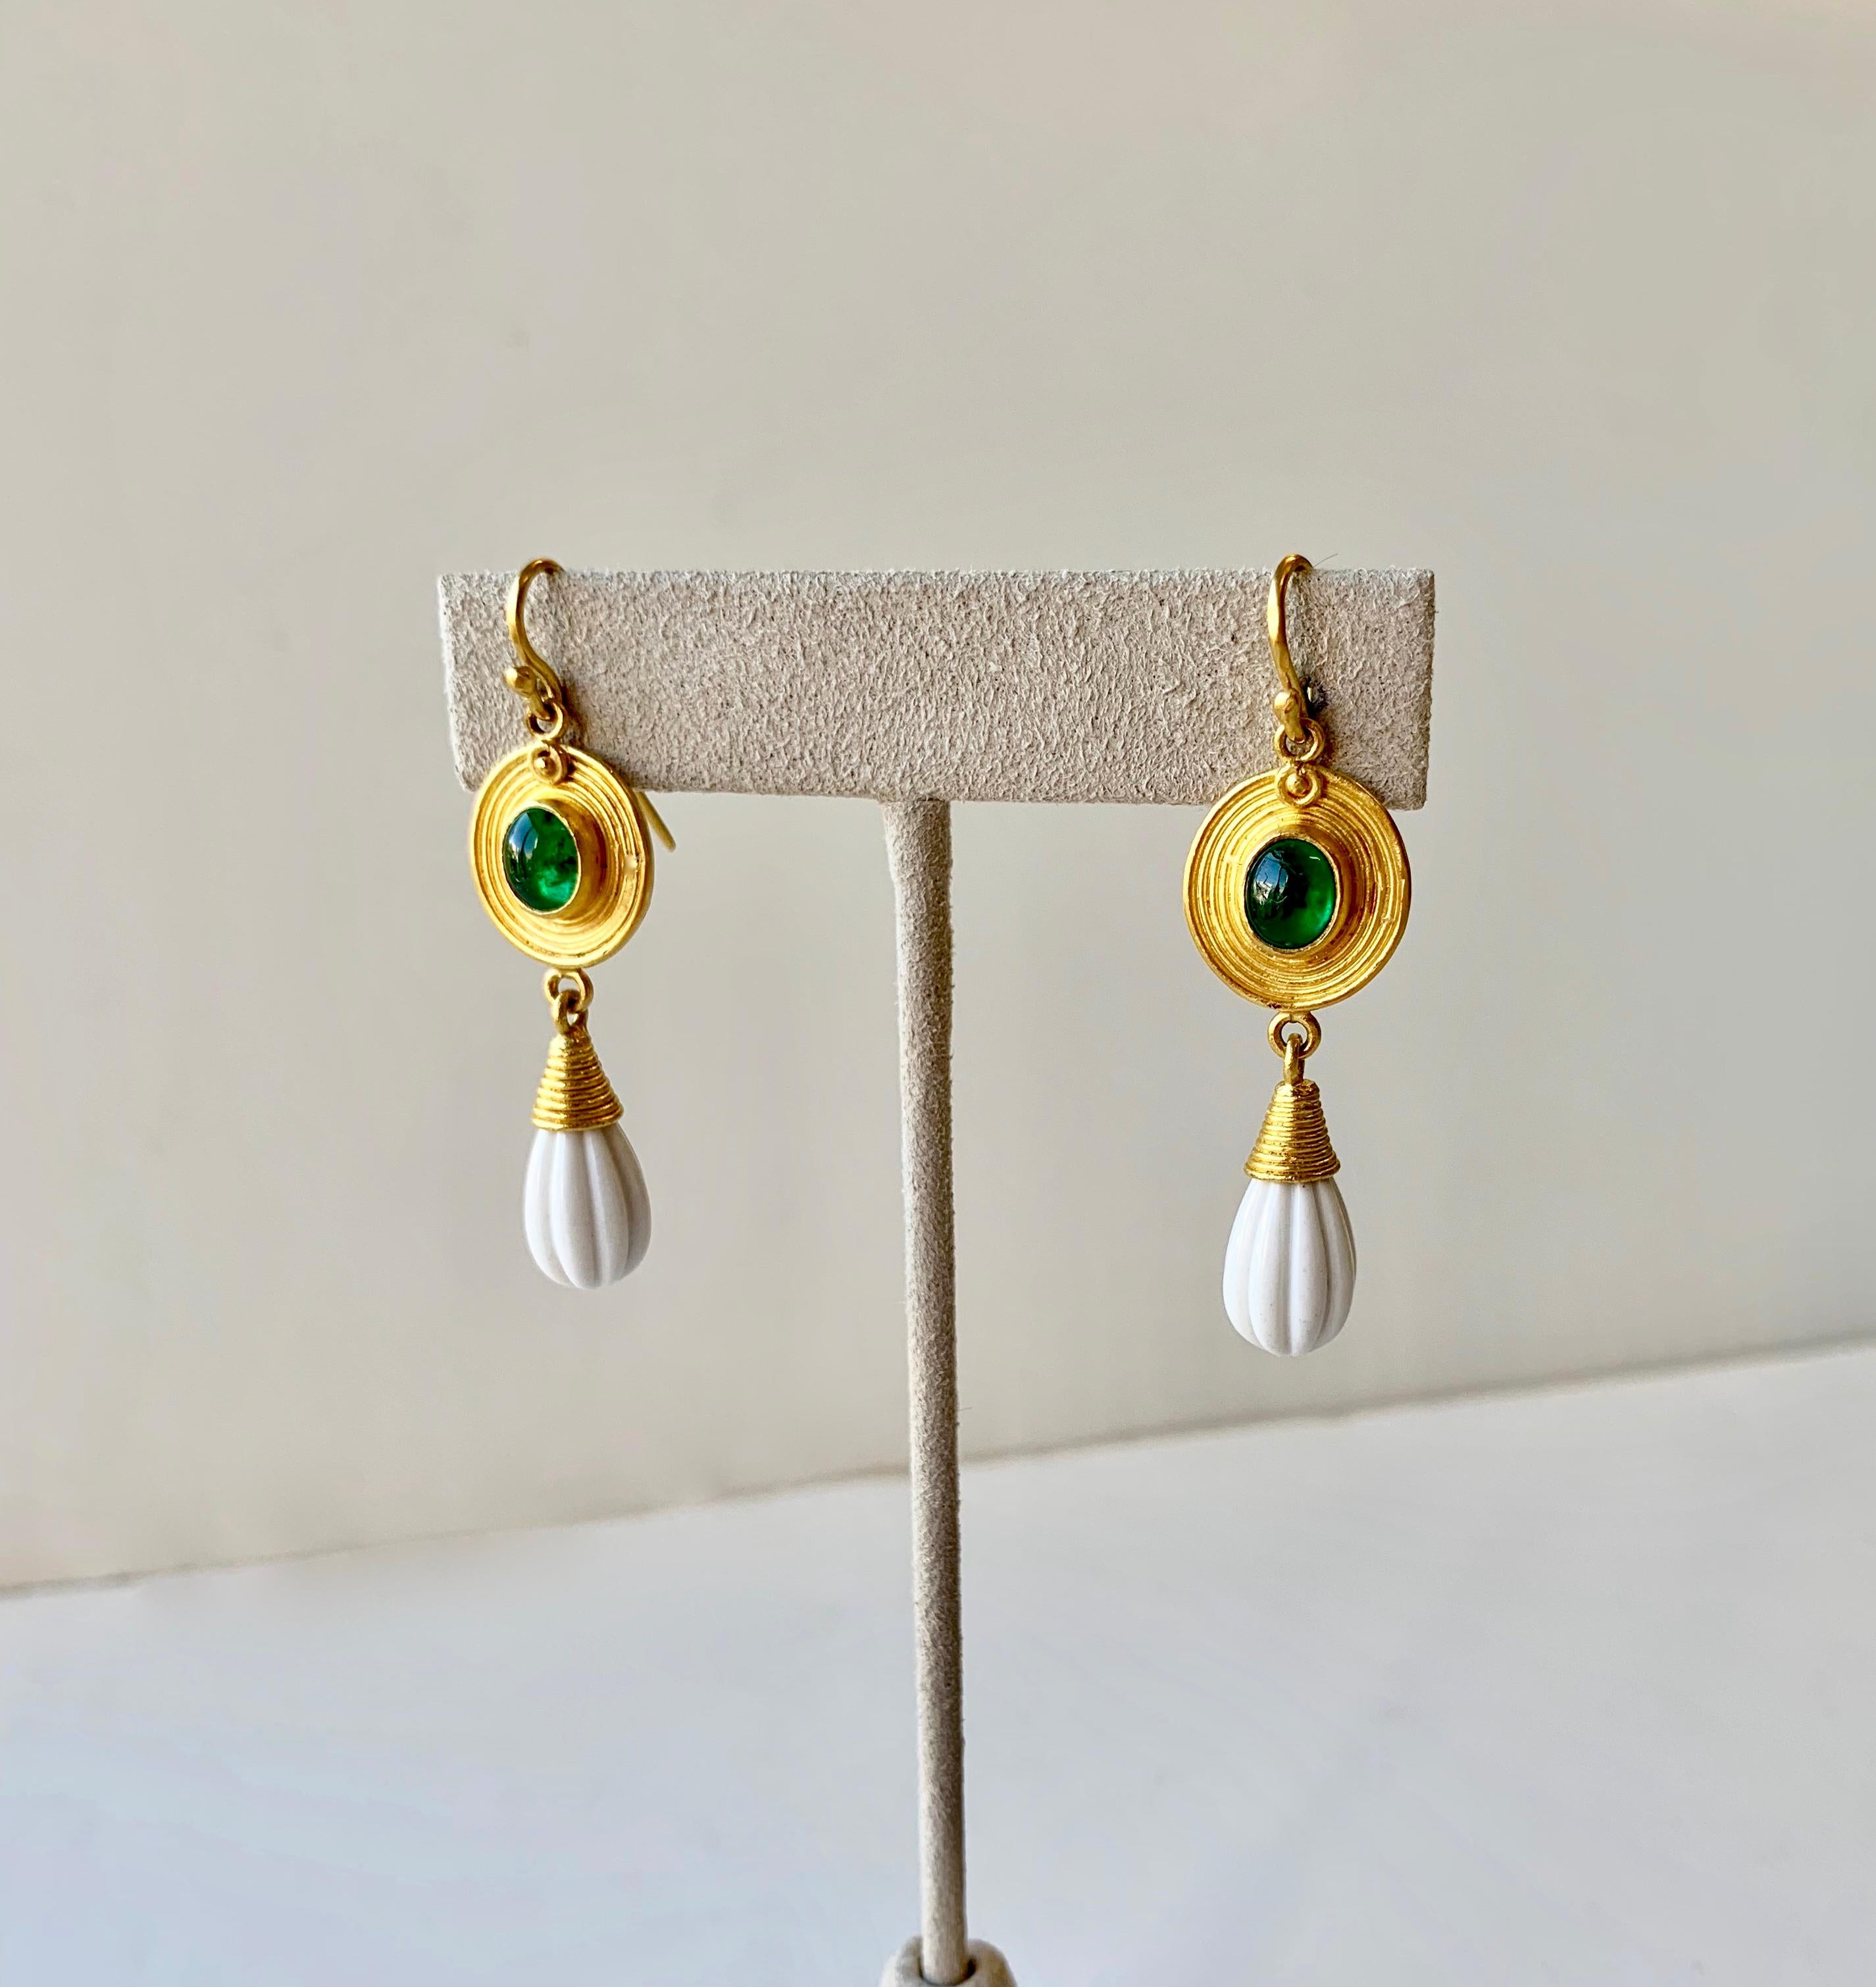 Oval Emerald cabochon earrings with carved Cachalong ( white Agathe) dangles in the style of Roman antiquity in 22 Karat gold and 20 Karat gold.
Hand made in New York, one of a kind.